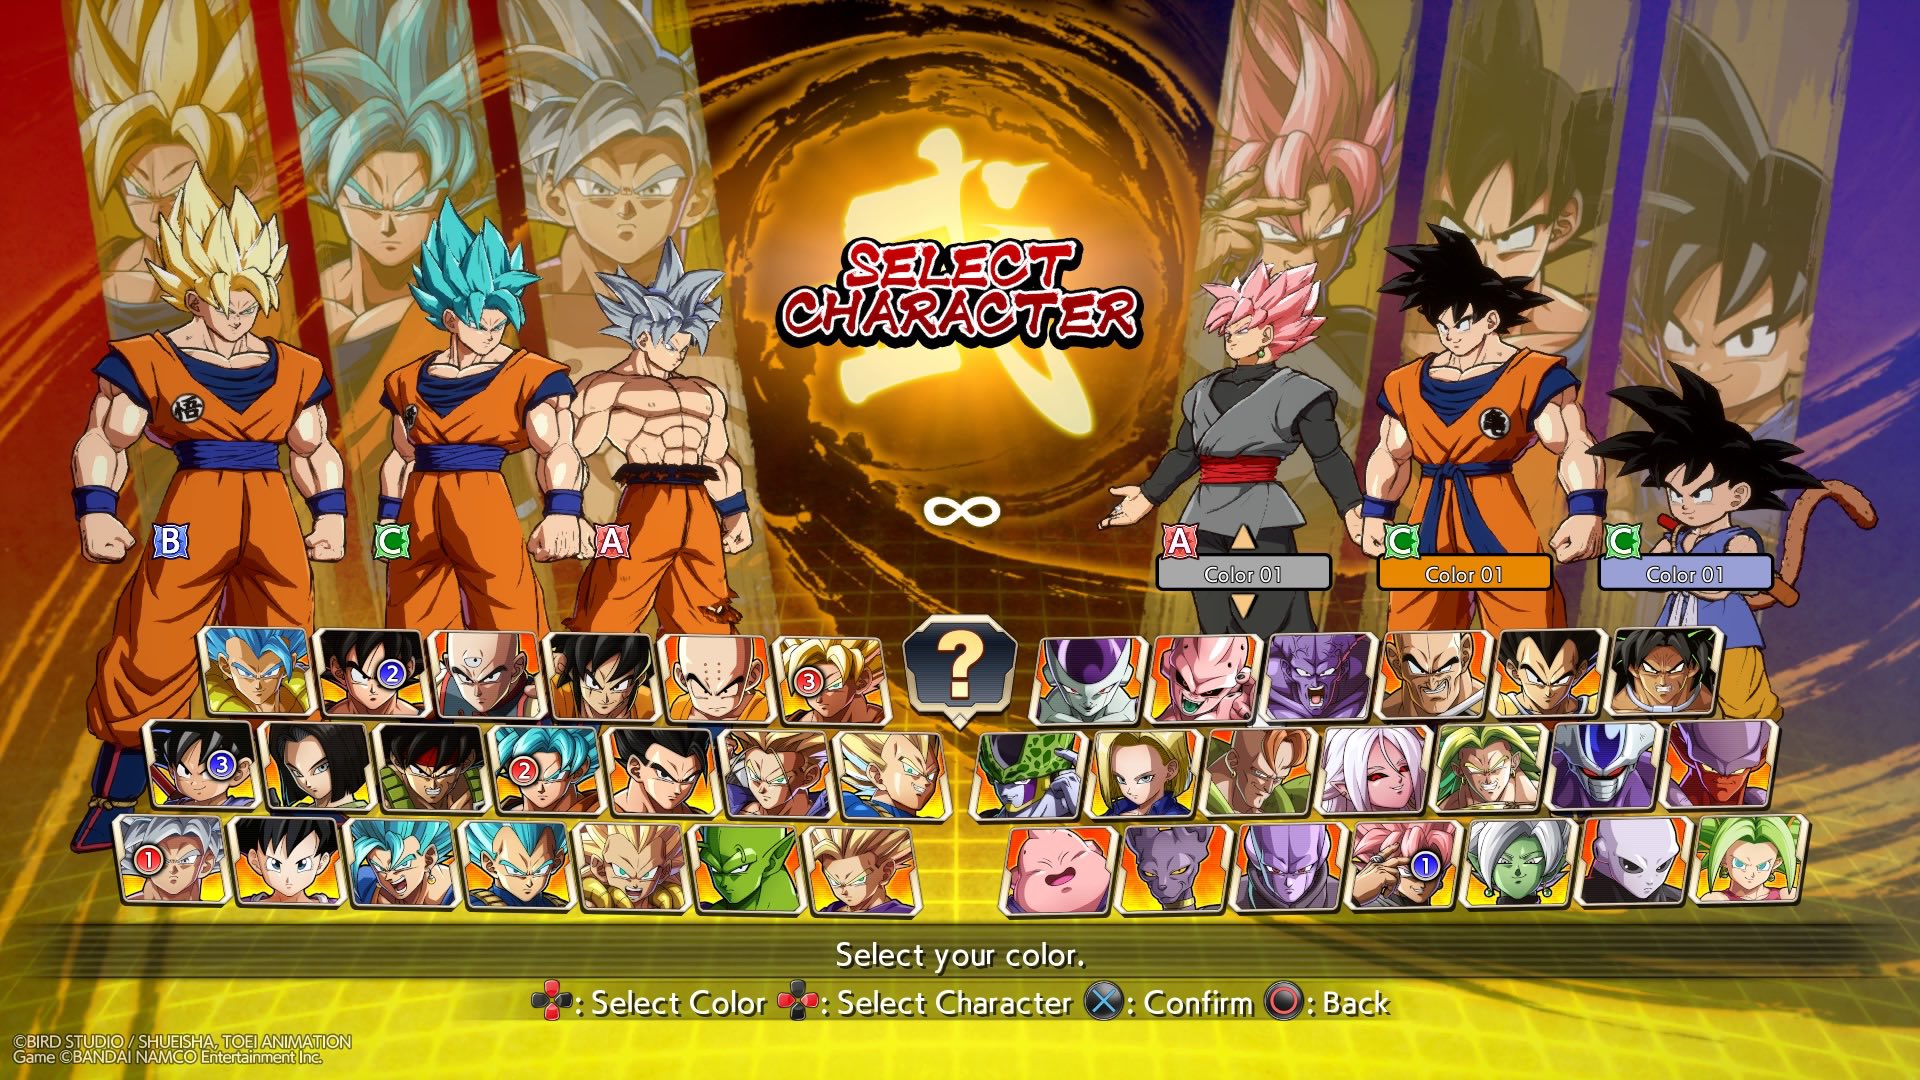 DOWNLOAD DRAGON BALL Z BUDOKAI TENKAICHI 4 HQ VERSION - ROSTER AND  CHARACTER REFERENCES 